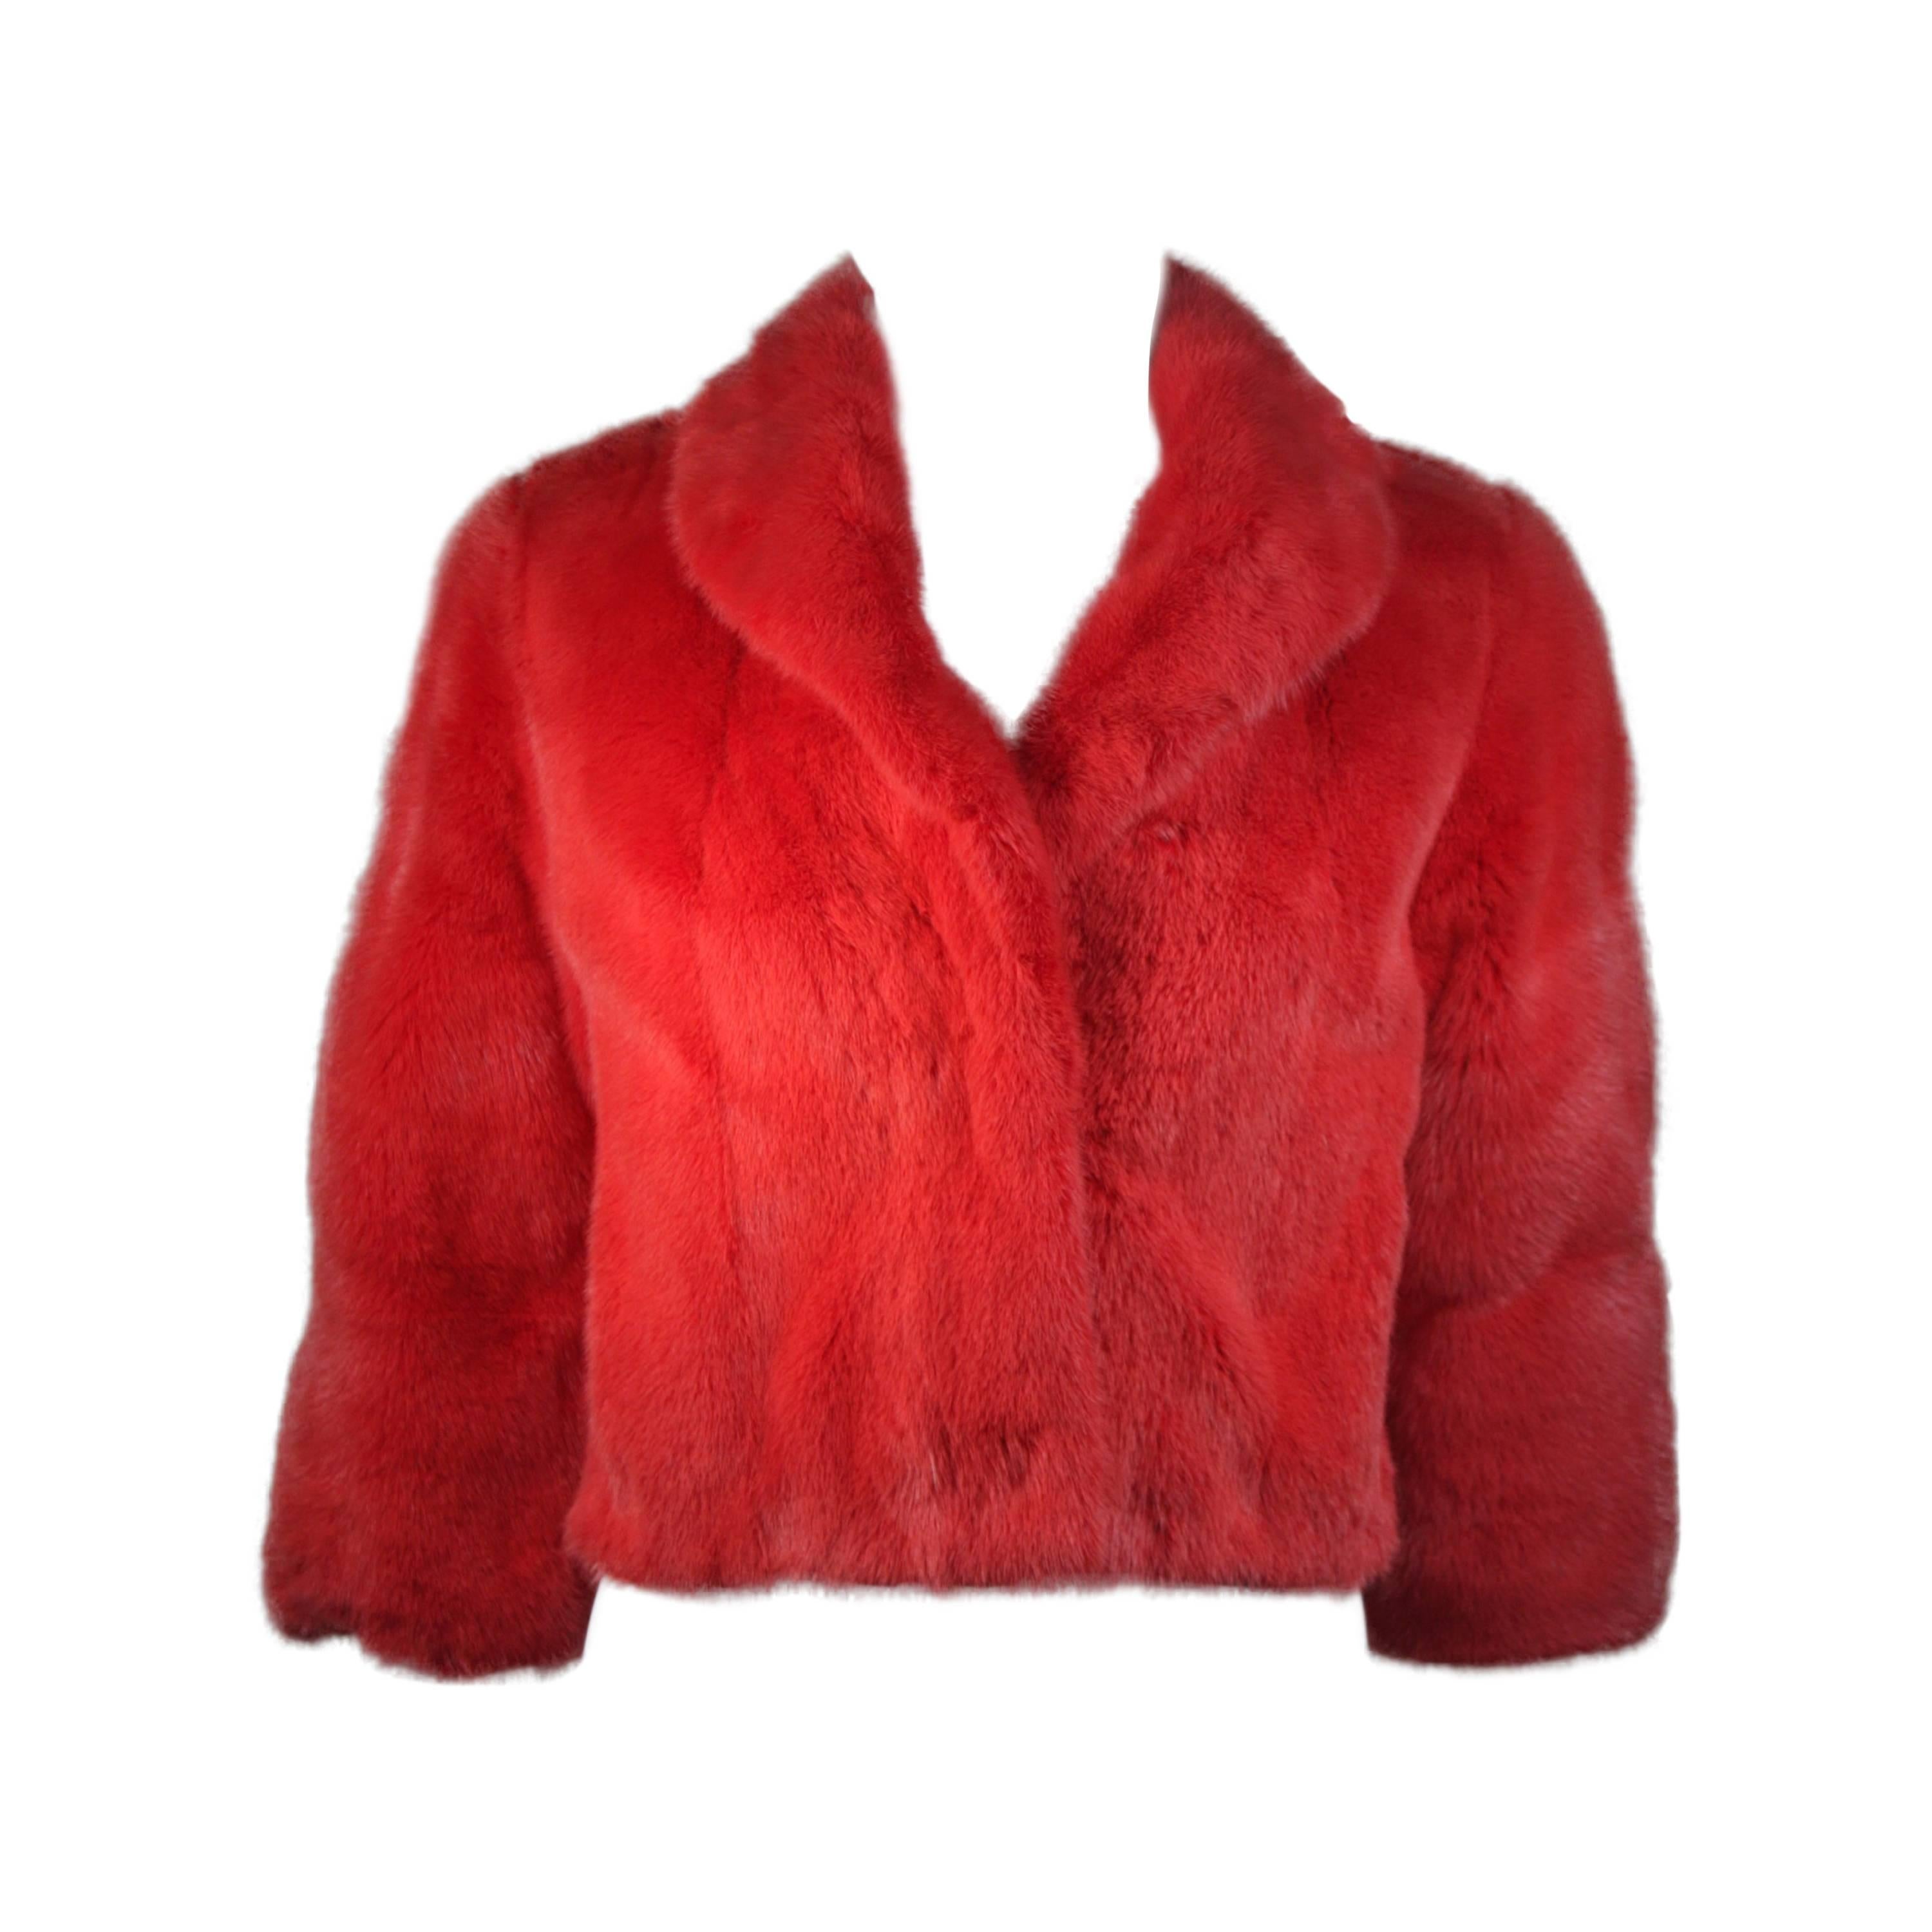 Female Mink Jacket in Strawberry Custom Order in Your Size